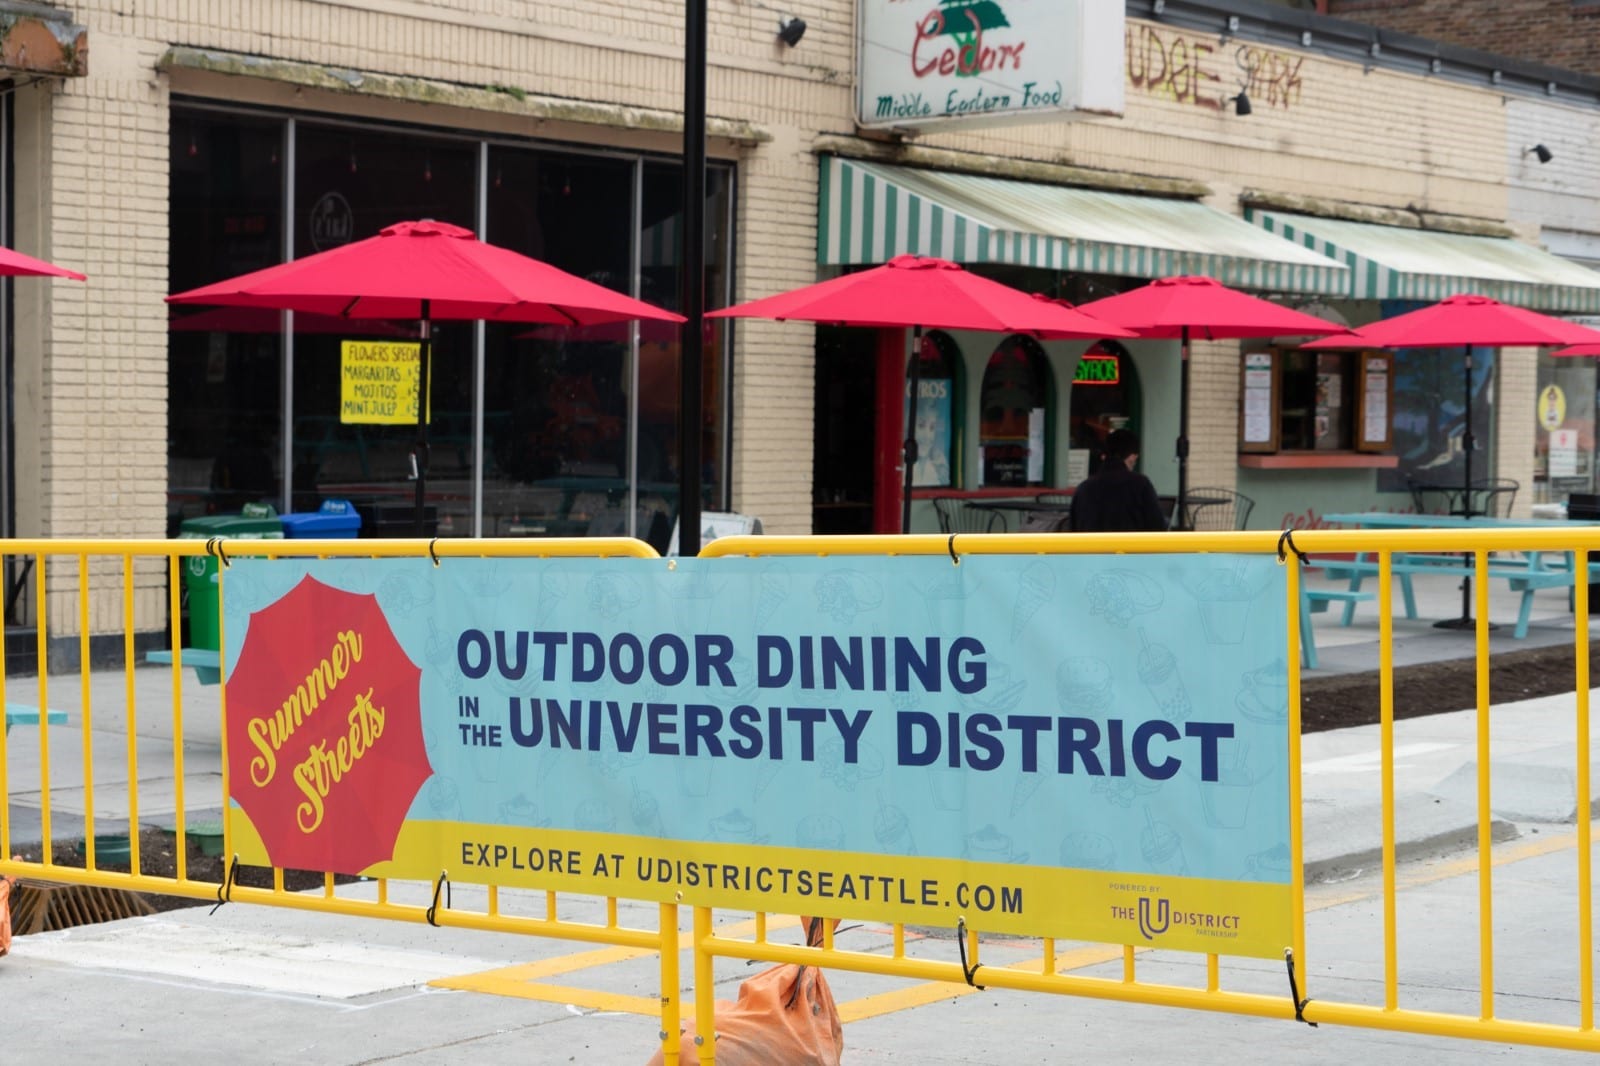 Outdoor dining in the University District. Photo Credit: University District Partnership.